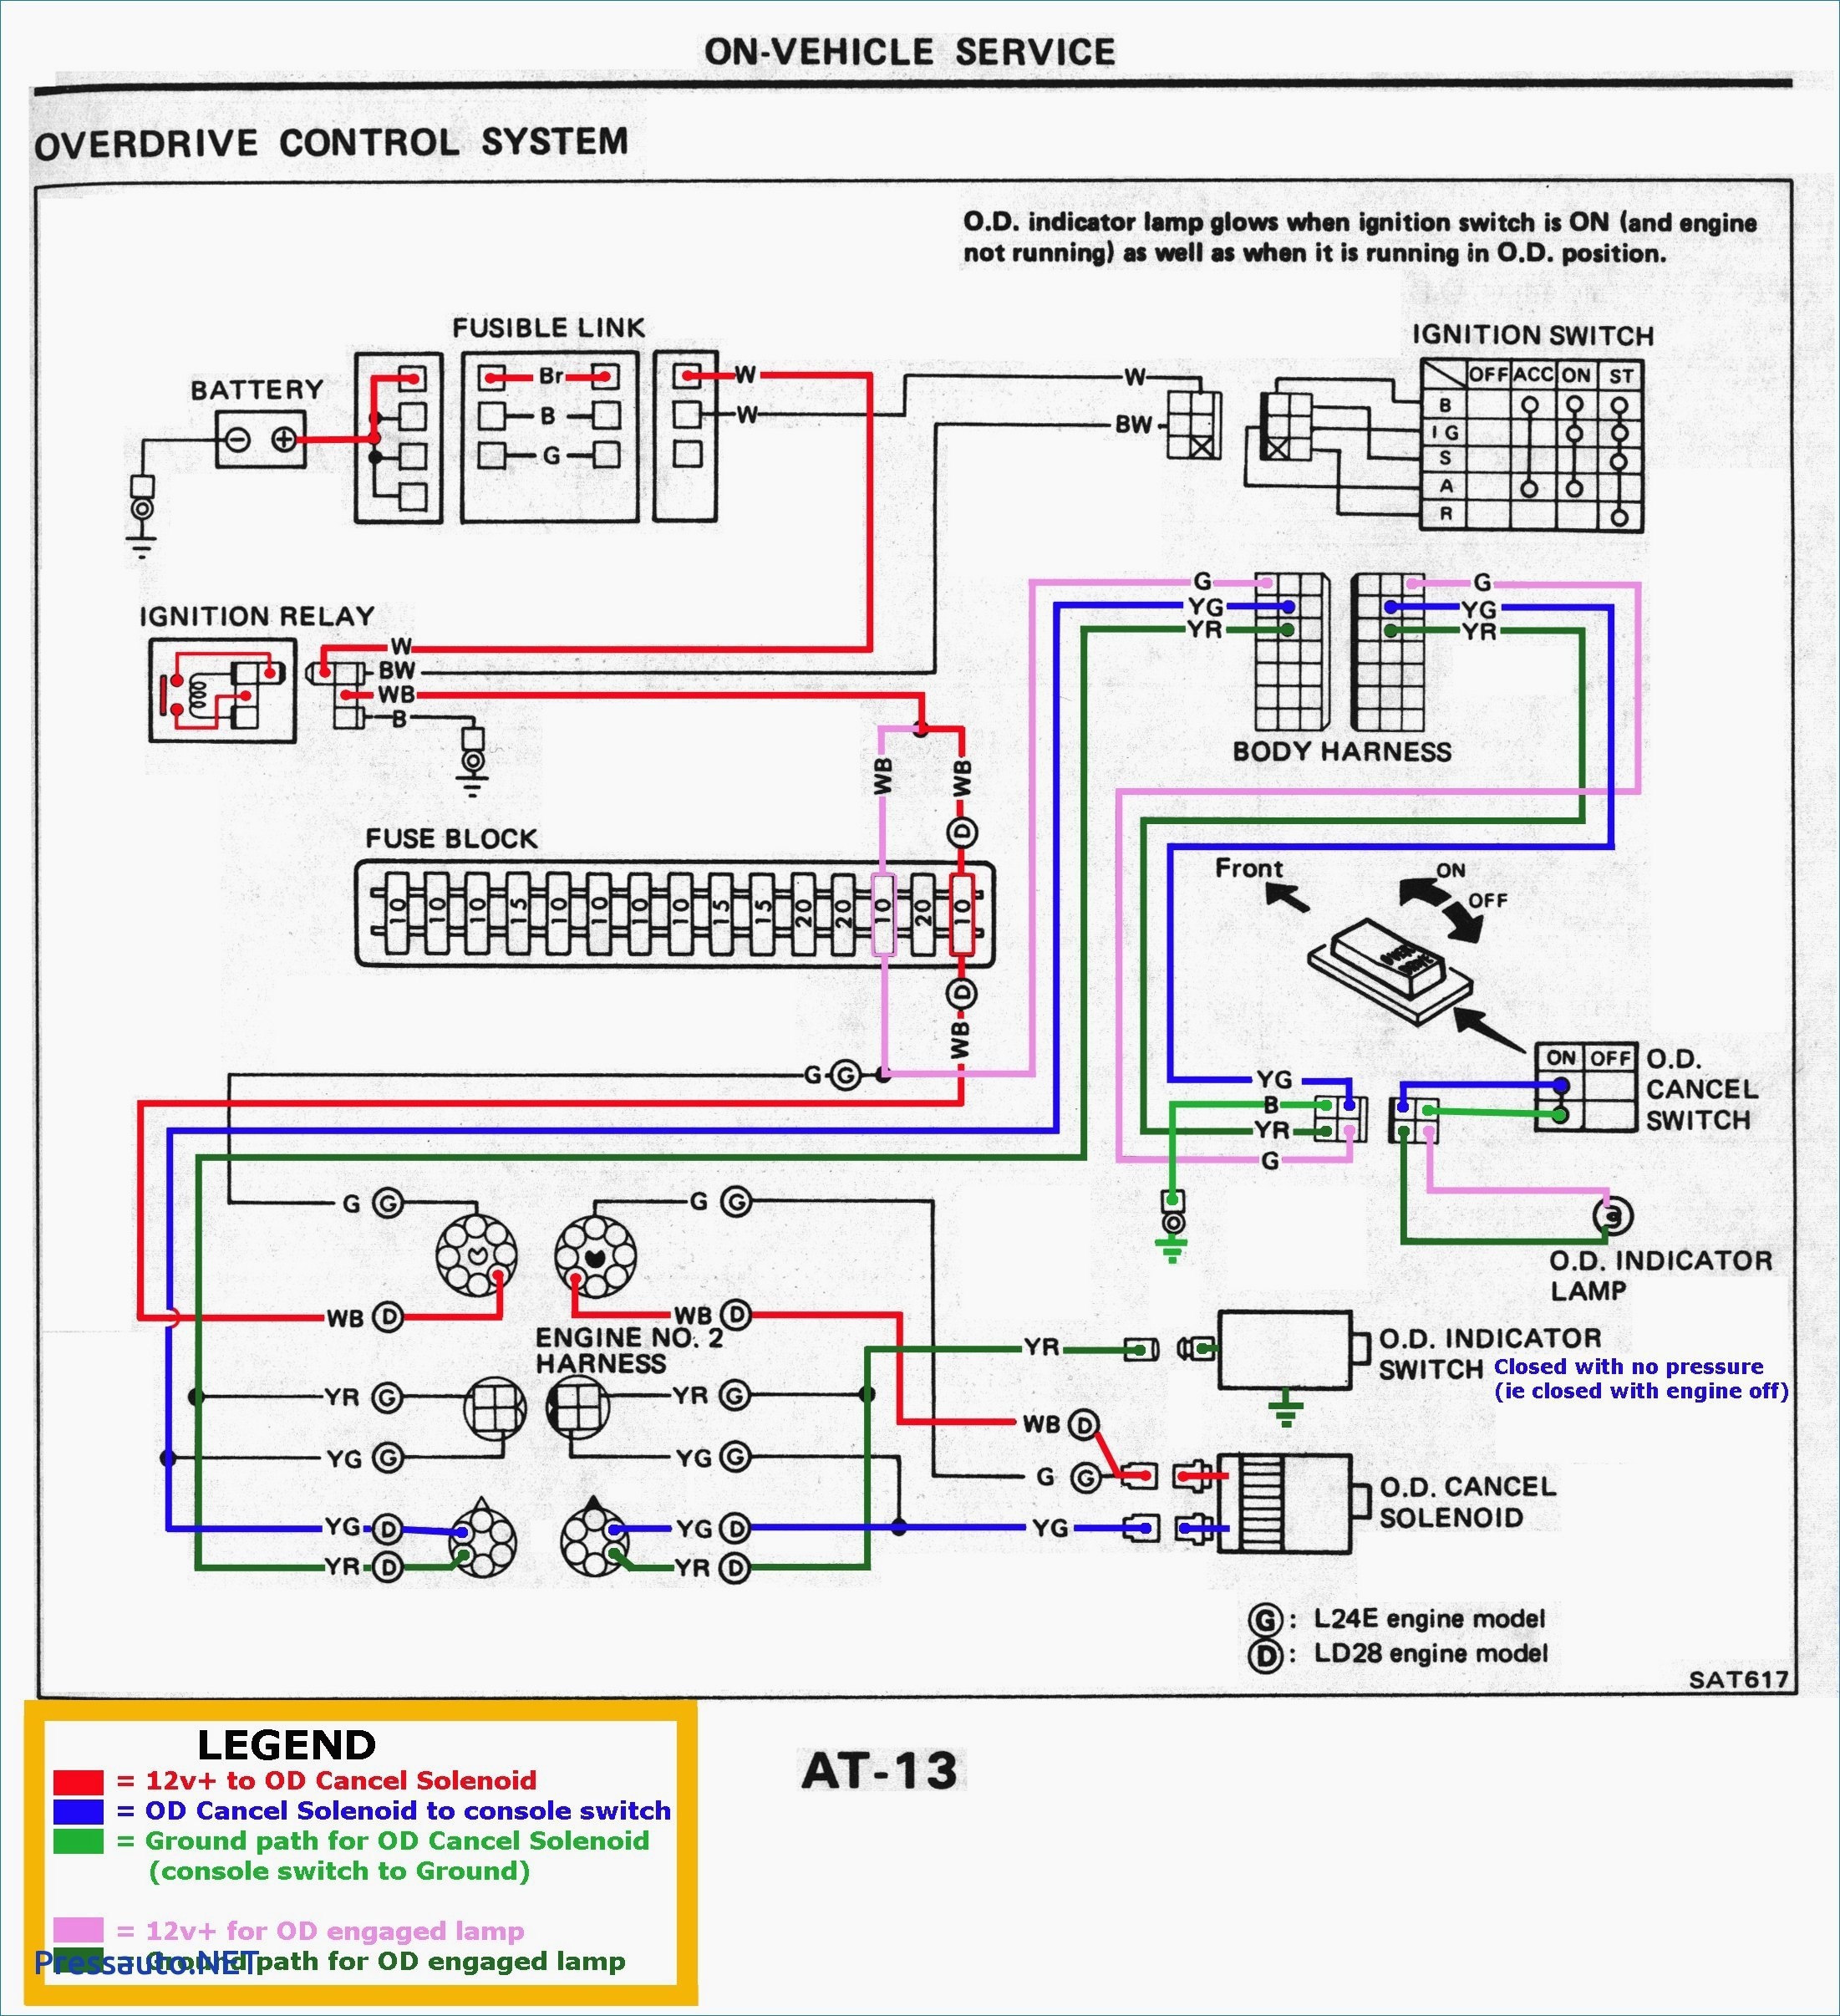 2005 ford Expedition Engine Diagram ford Expedition Wiring Diagram Citruscyclecenter Of 2005 ford Expedition Engine Diagram